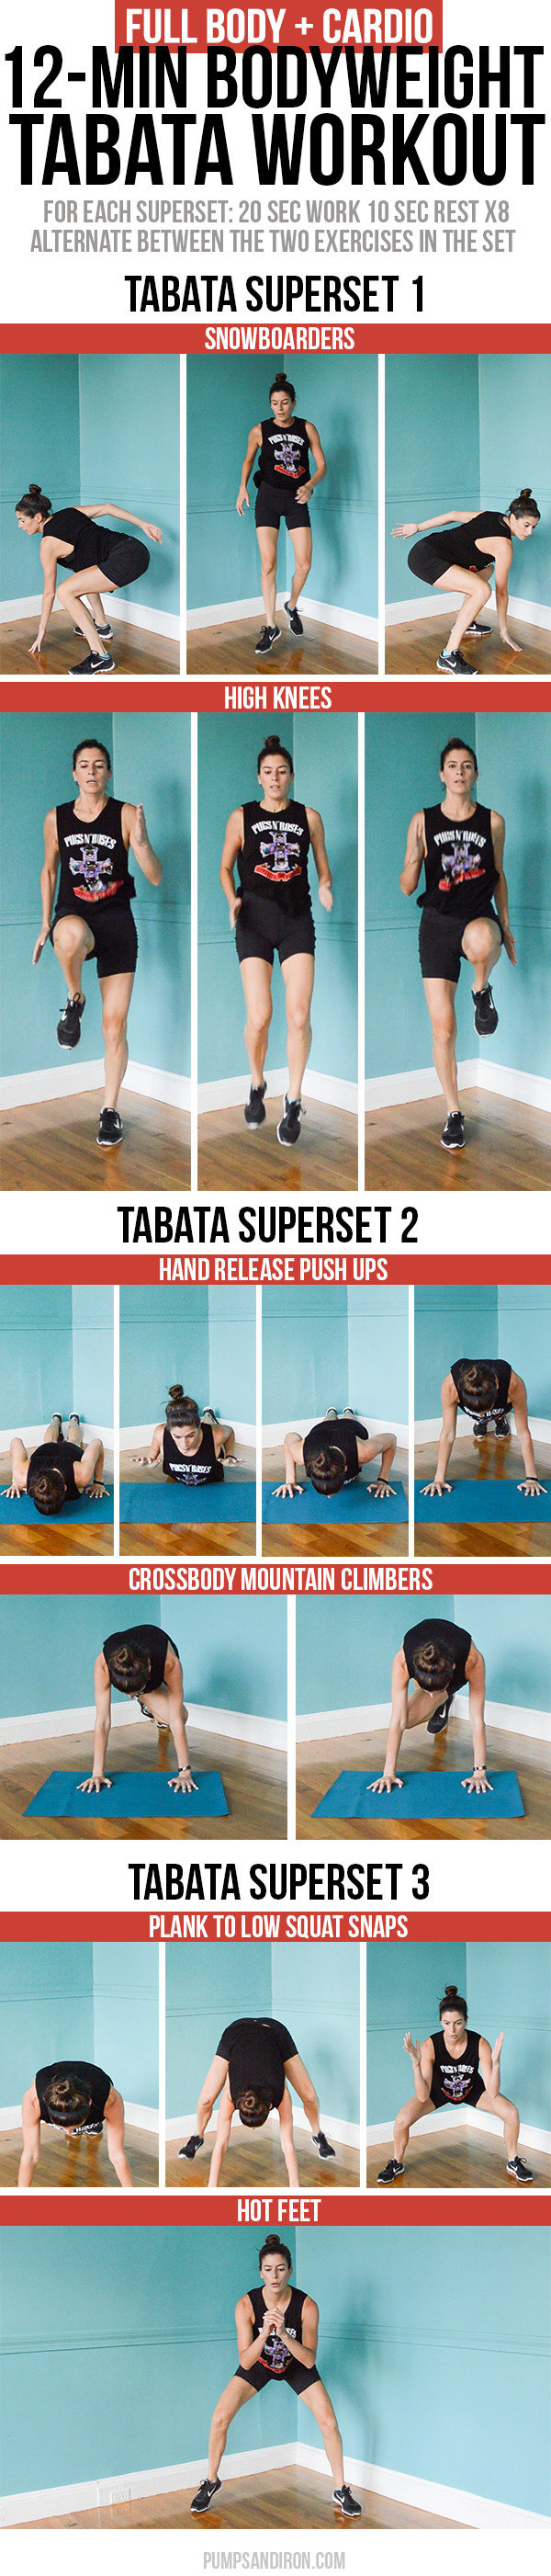 Bodyweight Tabata Workout: Total Body + Cardio - This 12-minute workout is broken up into three tabata supersets. Video included so you can follow along at home! #tabata #tabataworkout #bodyweightworkout #athomeworkout #intervaltraining #hiit